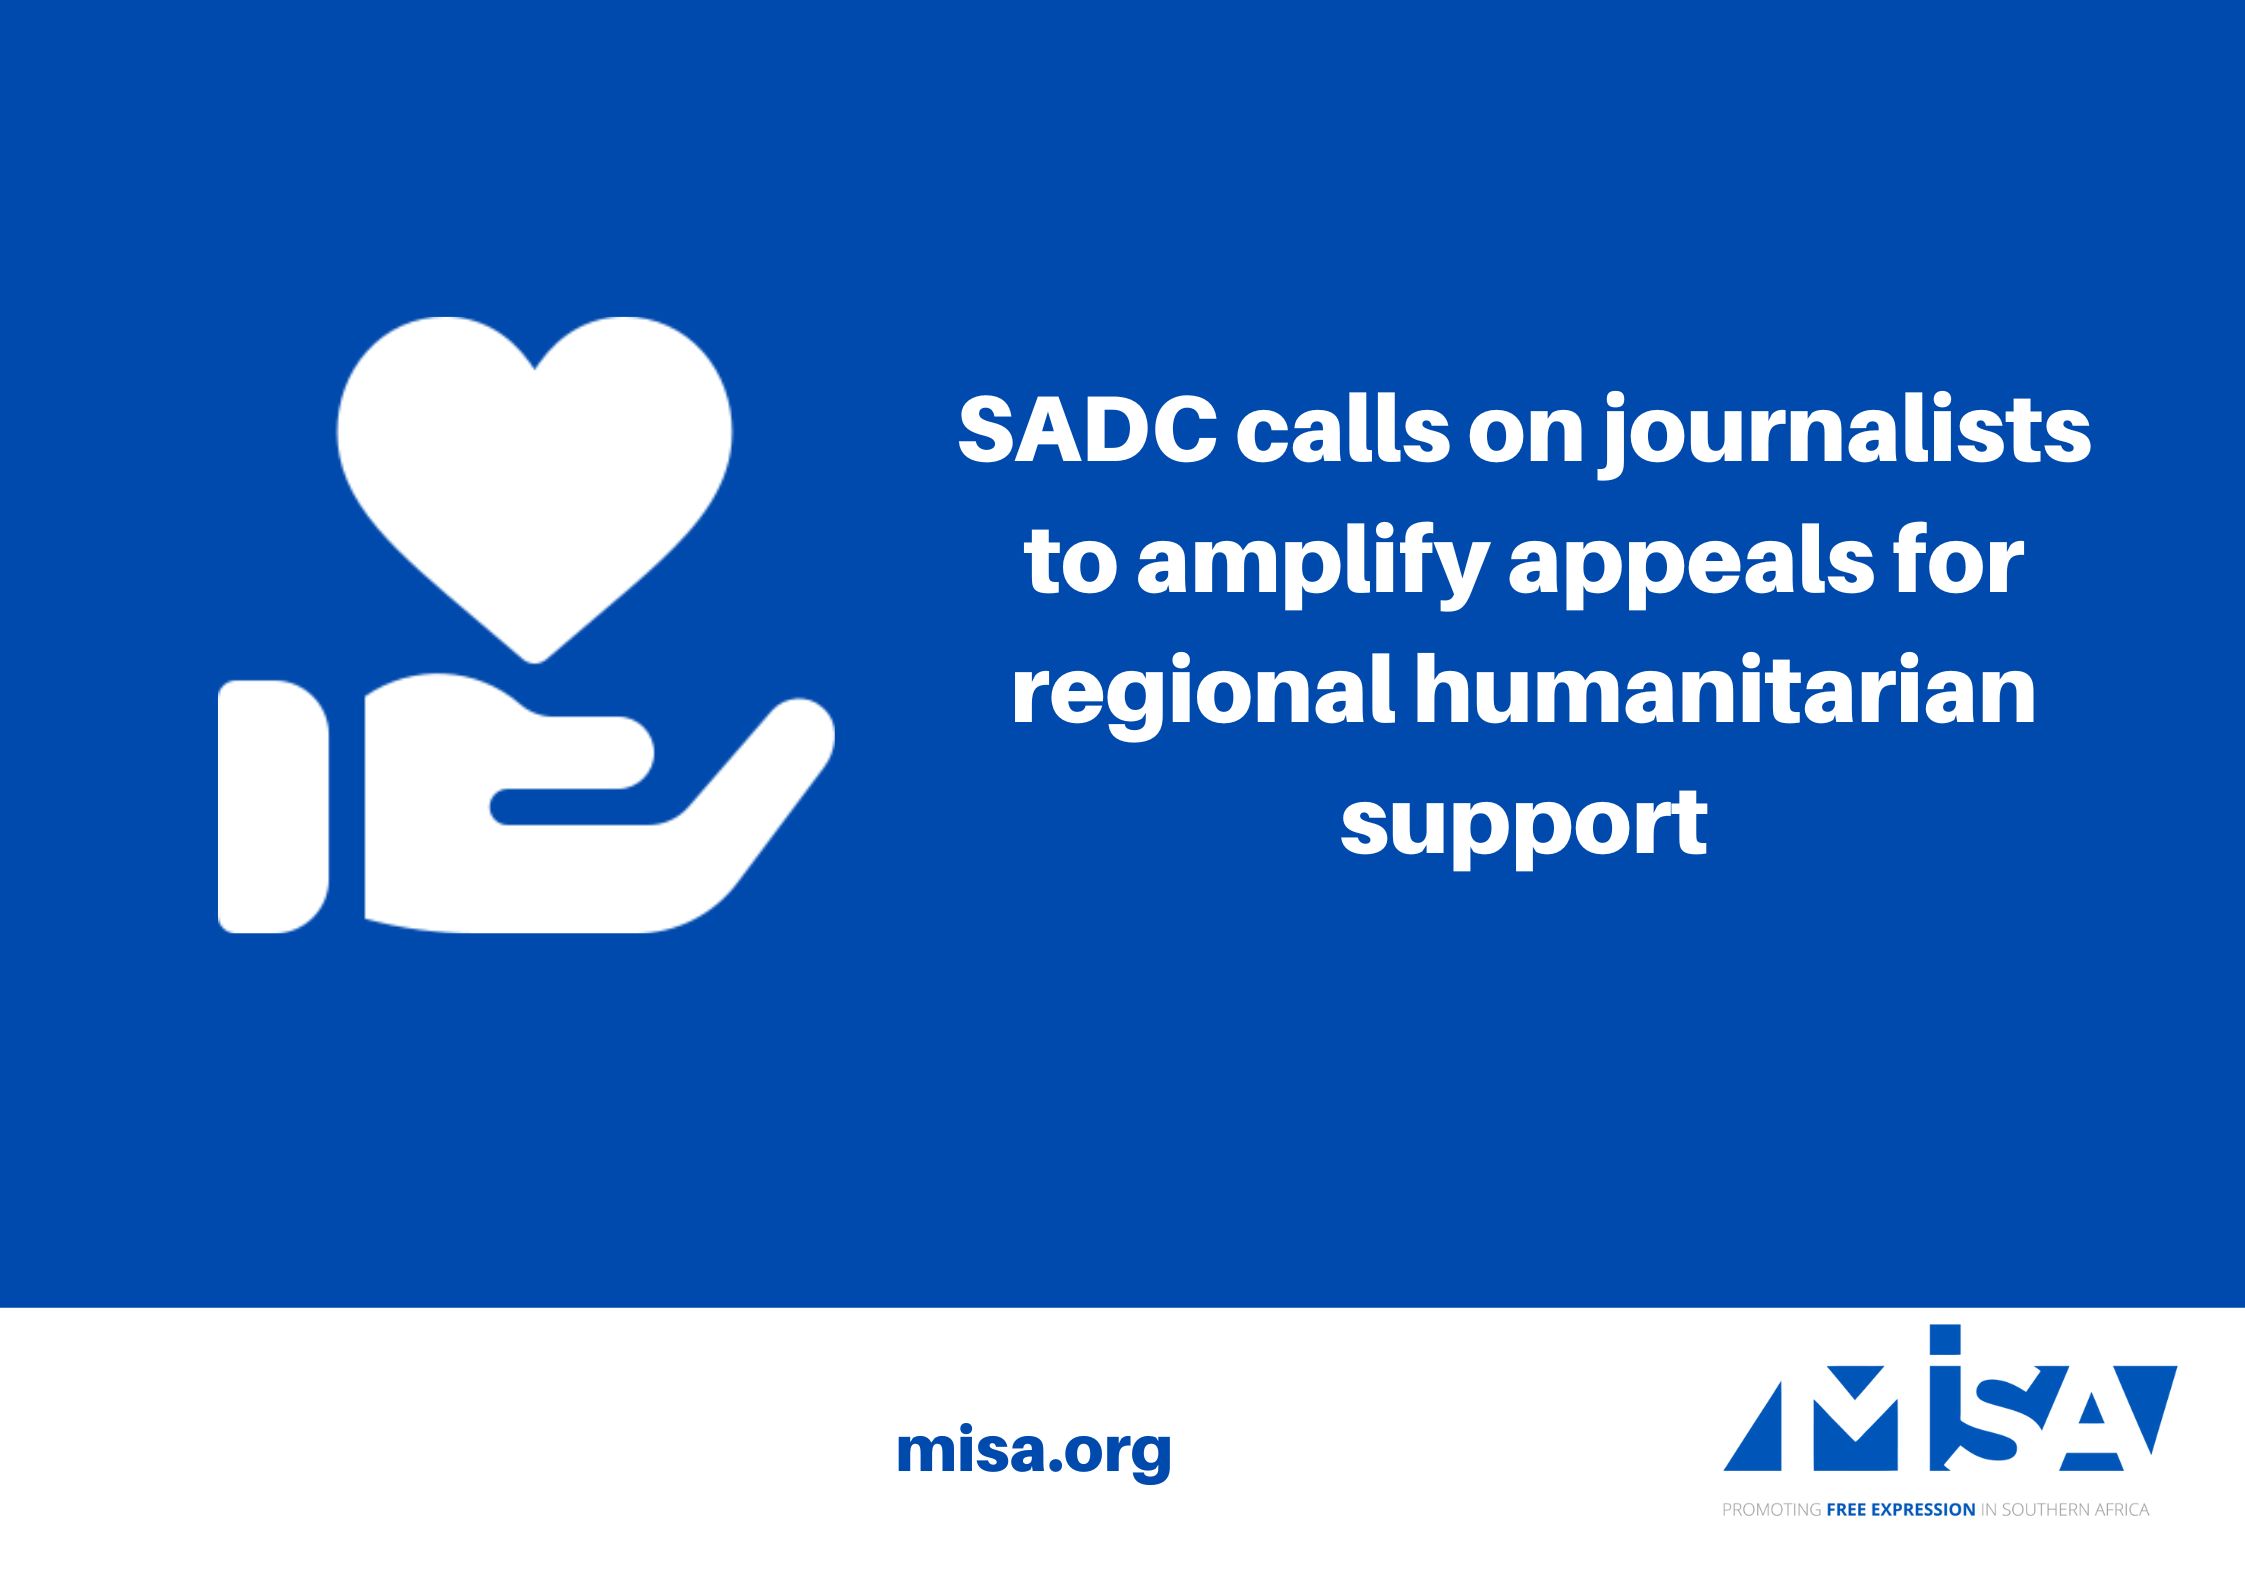 SADC calls on journalists to amplify appeals for regional humanitarian support